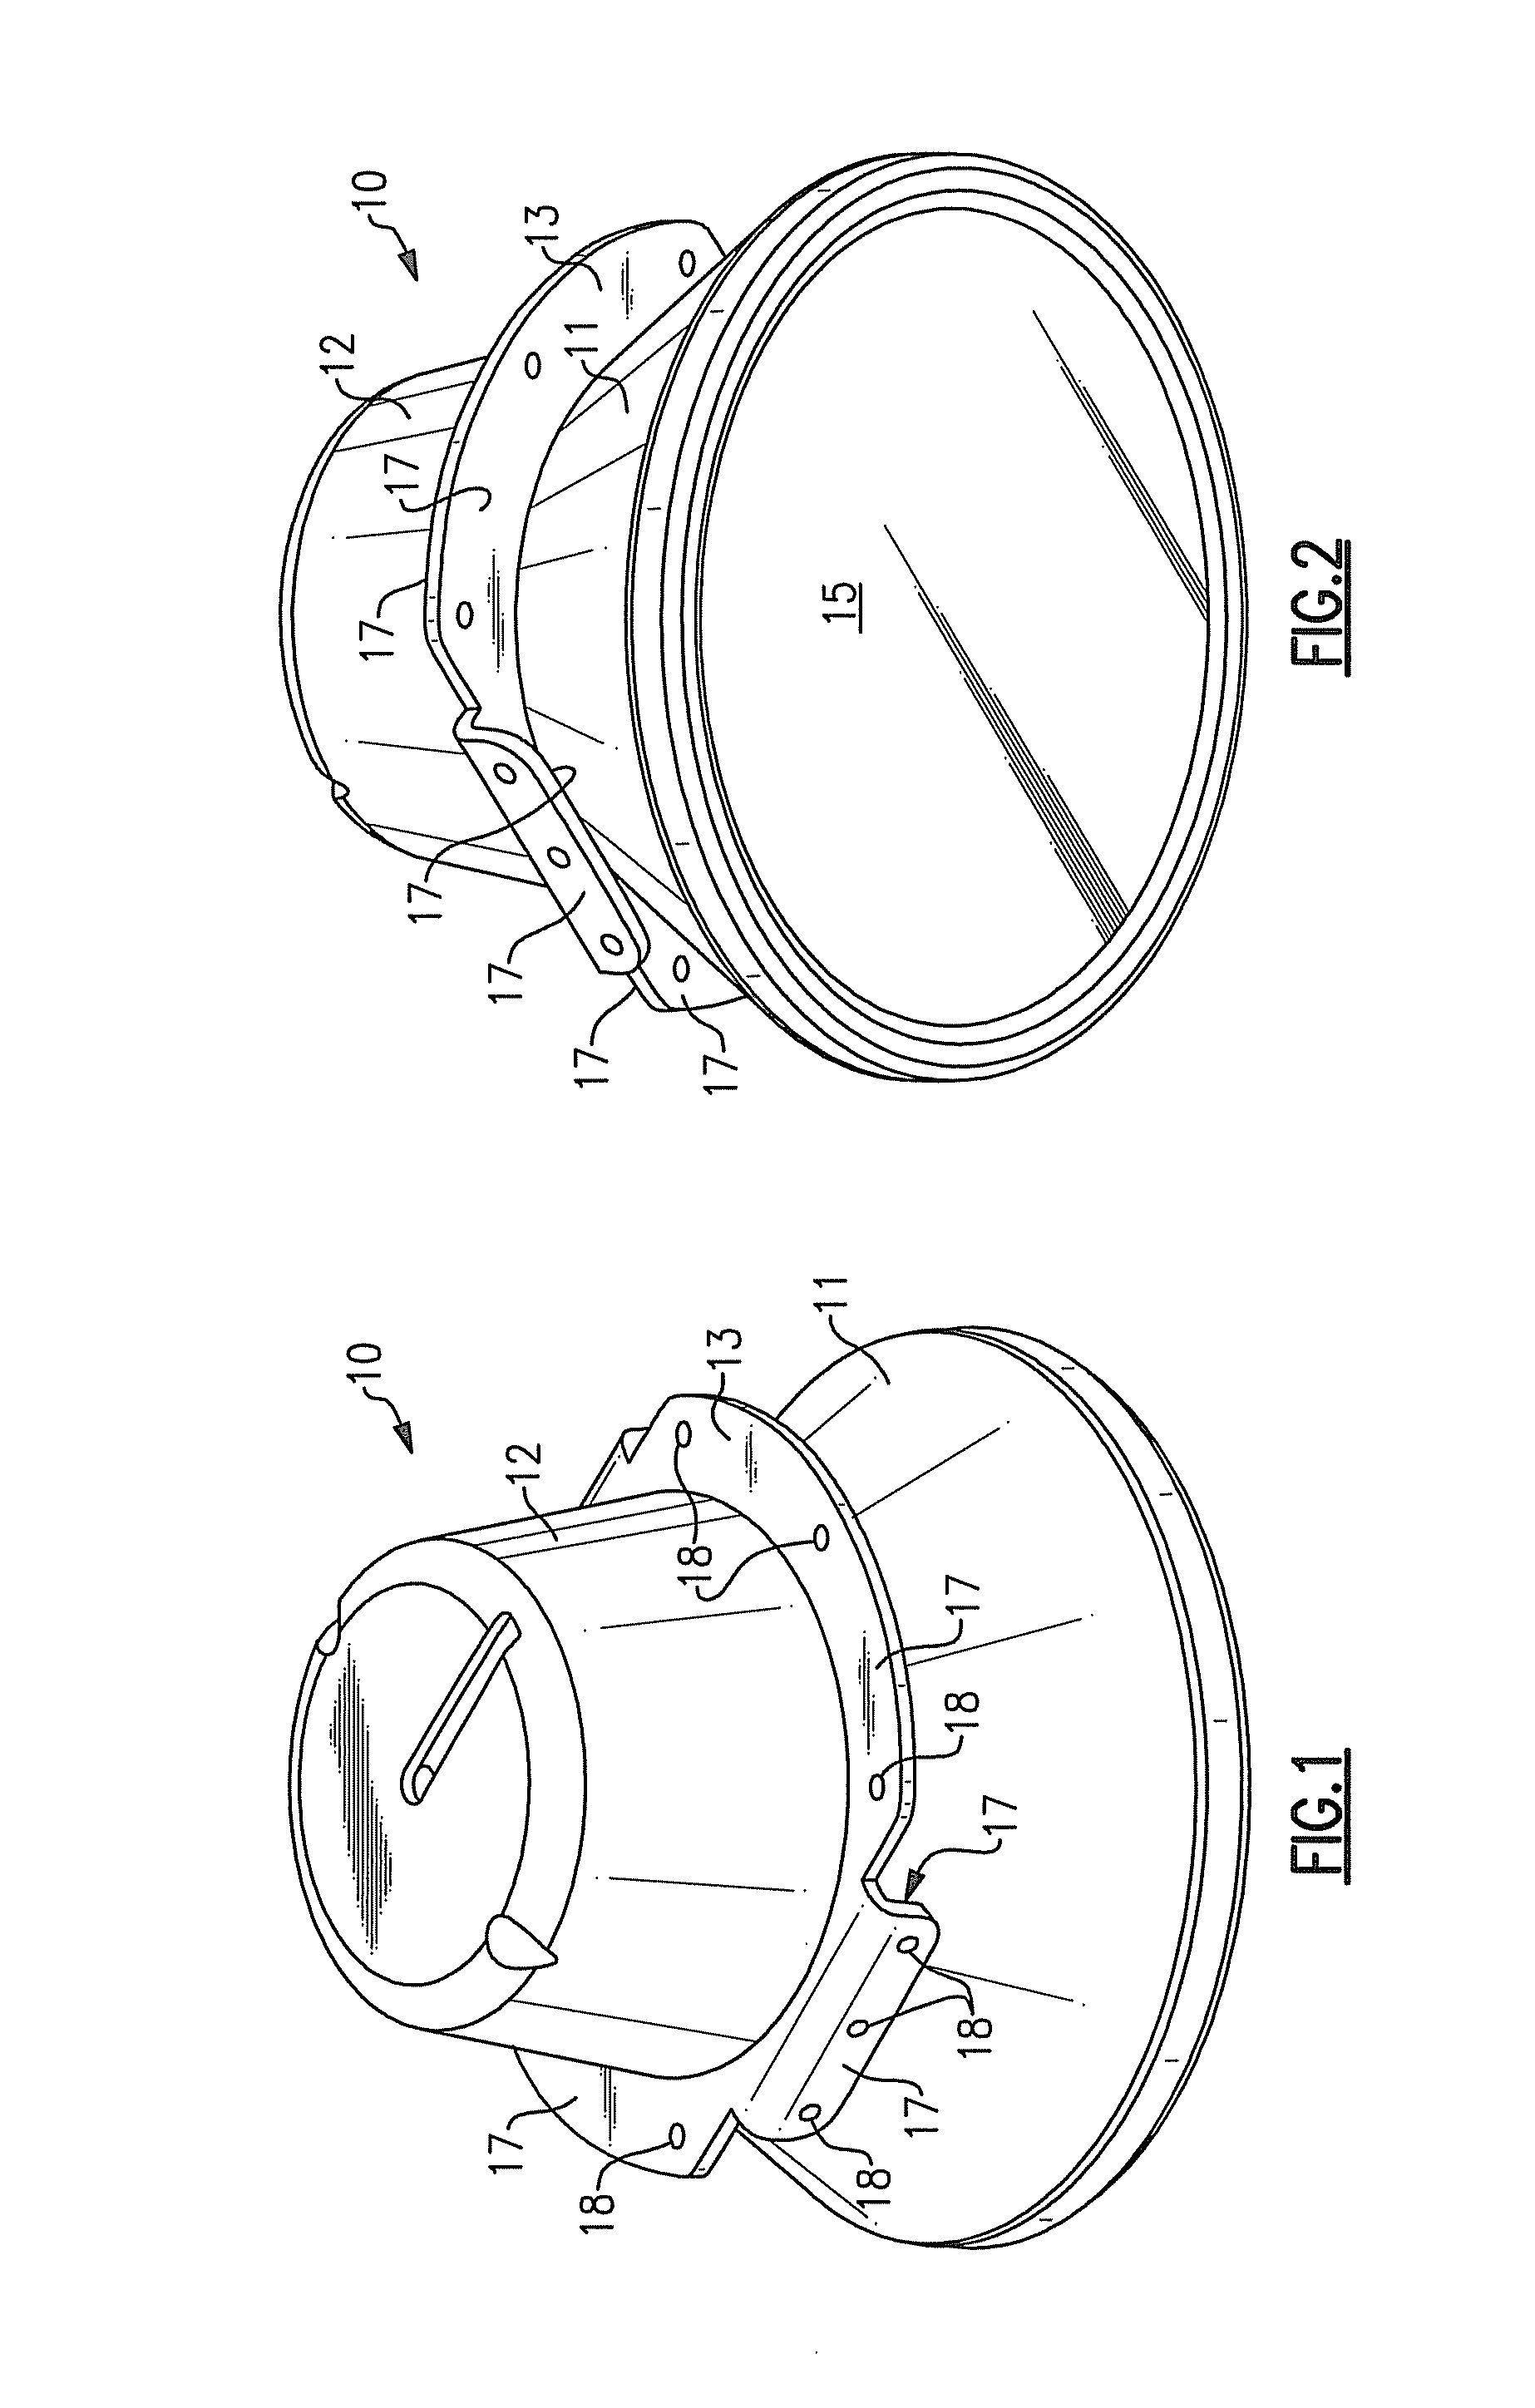 Light engines for lighting devices